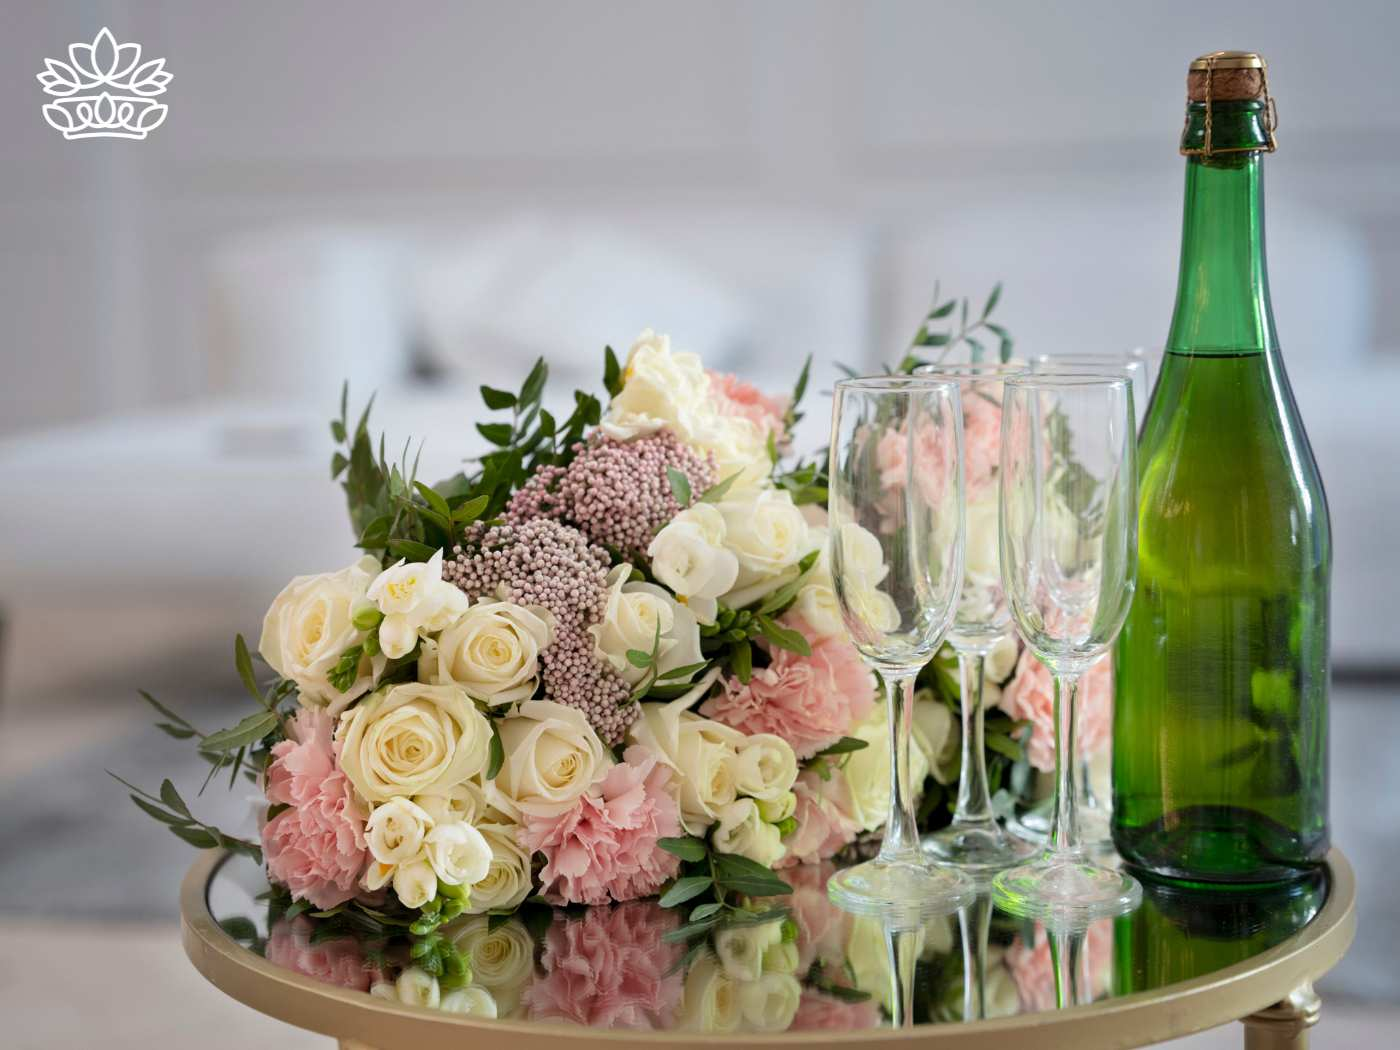 Bouquet of white and pink flowers next to a bottle of champagne and glasses. Flowers with Champagne & Wine. Delivered with Heart. Fabulous Flowers and Gifts.